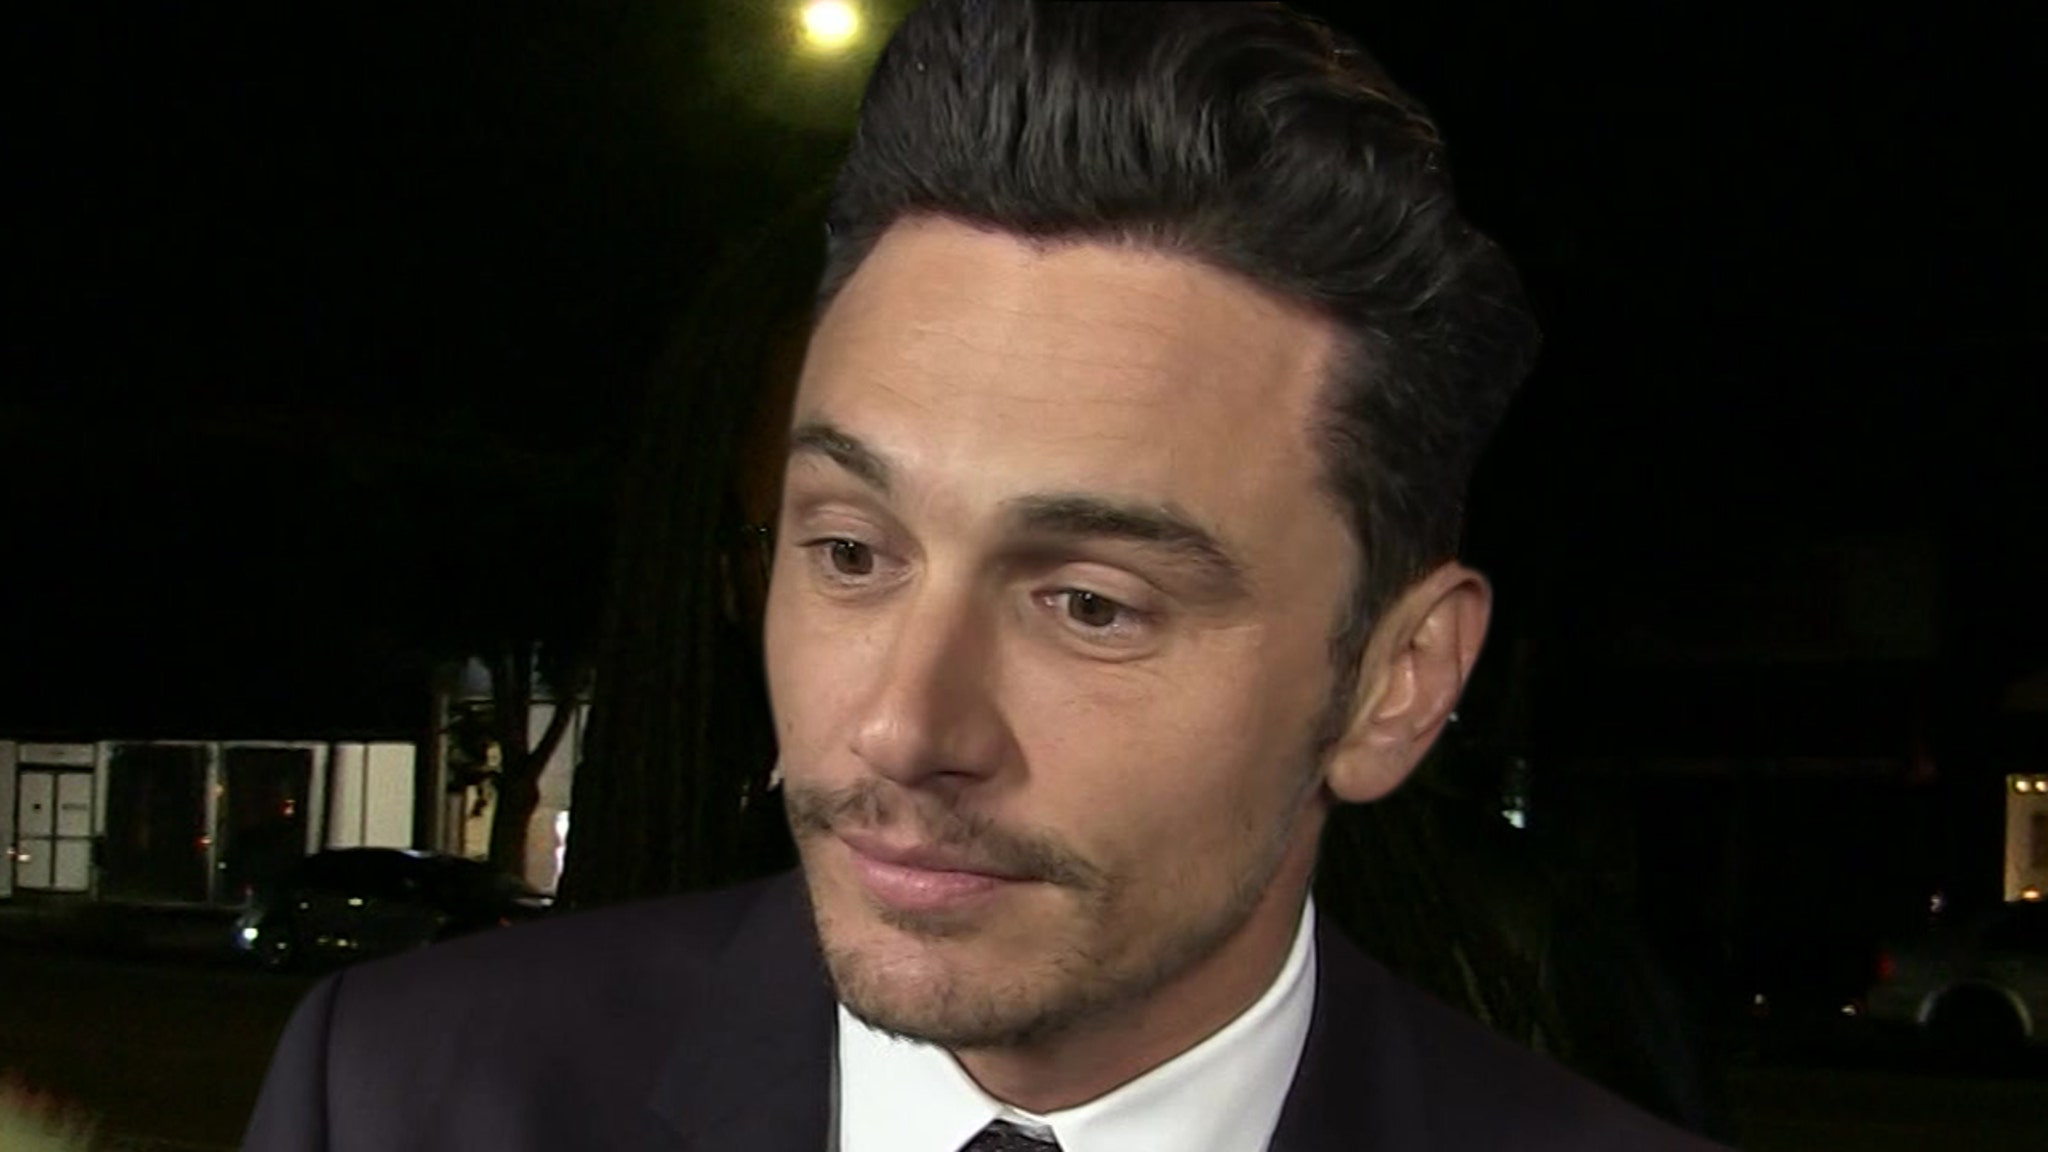 James Franco Settles Sexual Misconduct Lawsuit for $2.235 Million